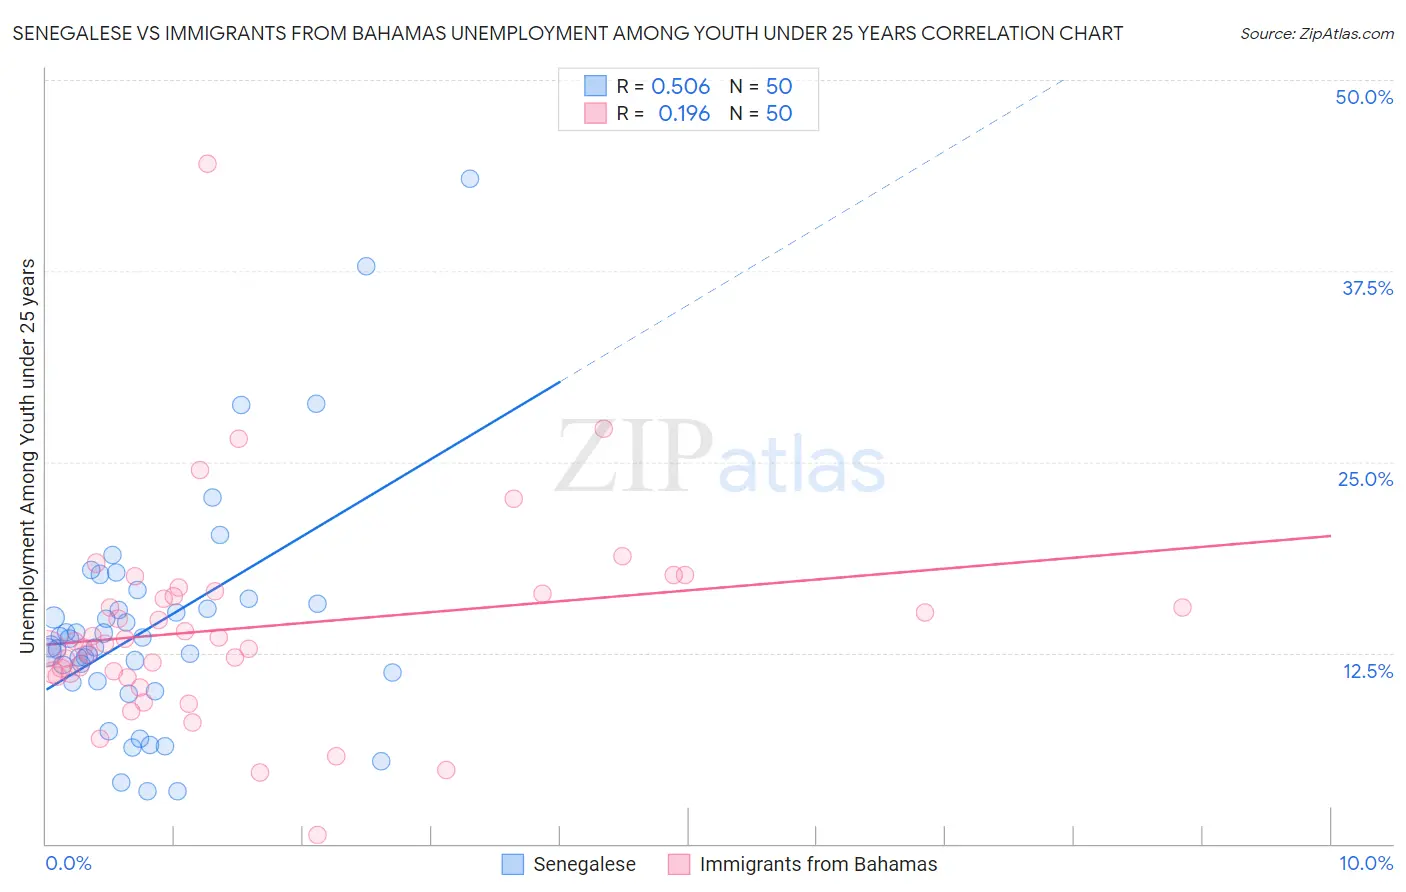 Senegalese vs Immigrants from Bahamas Unemployment Among Youth under 25 years